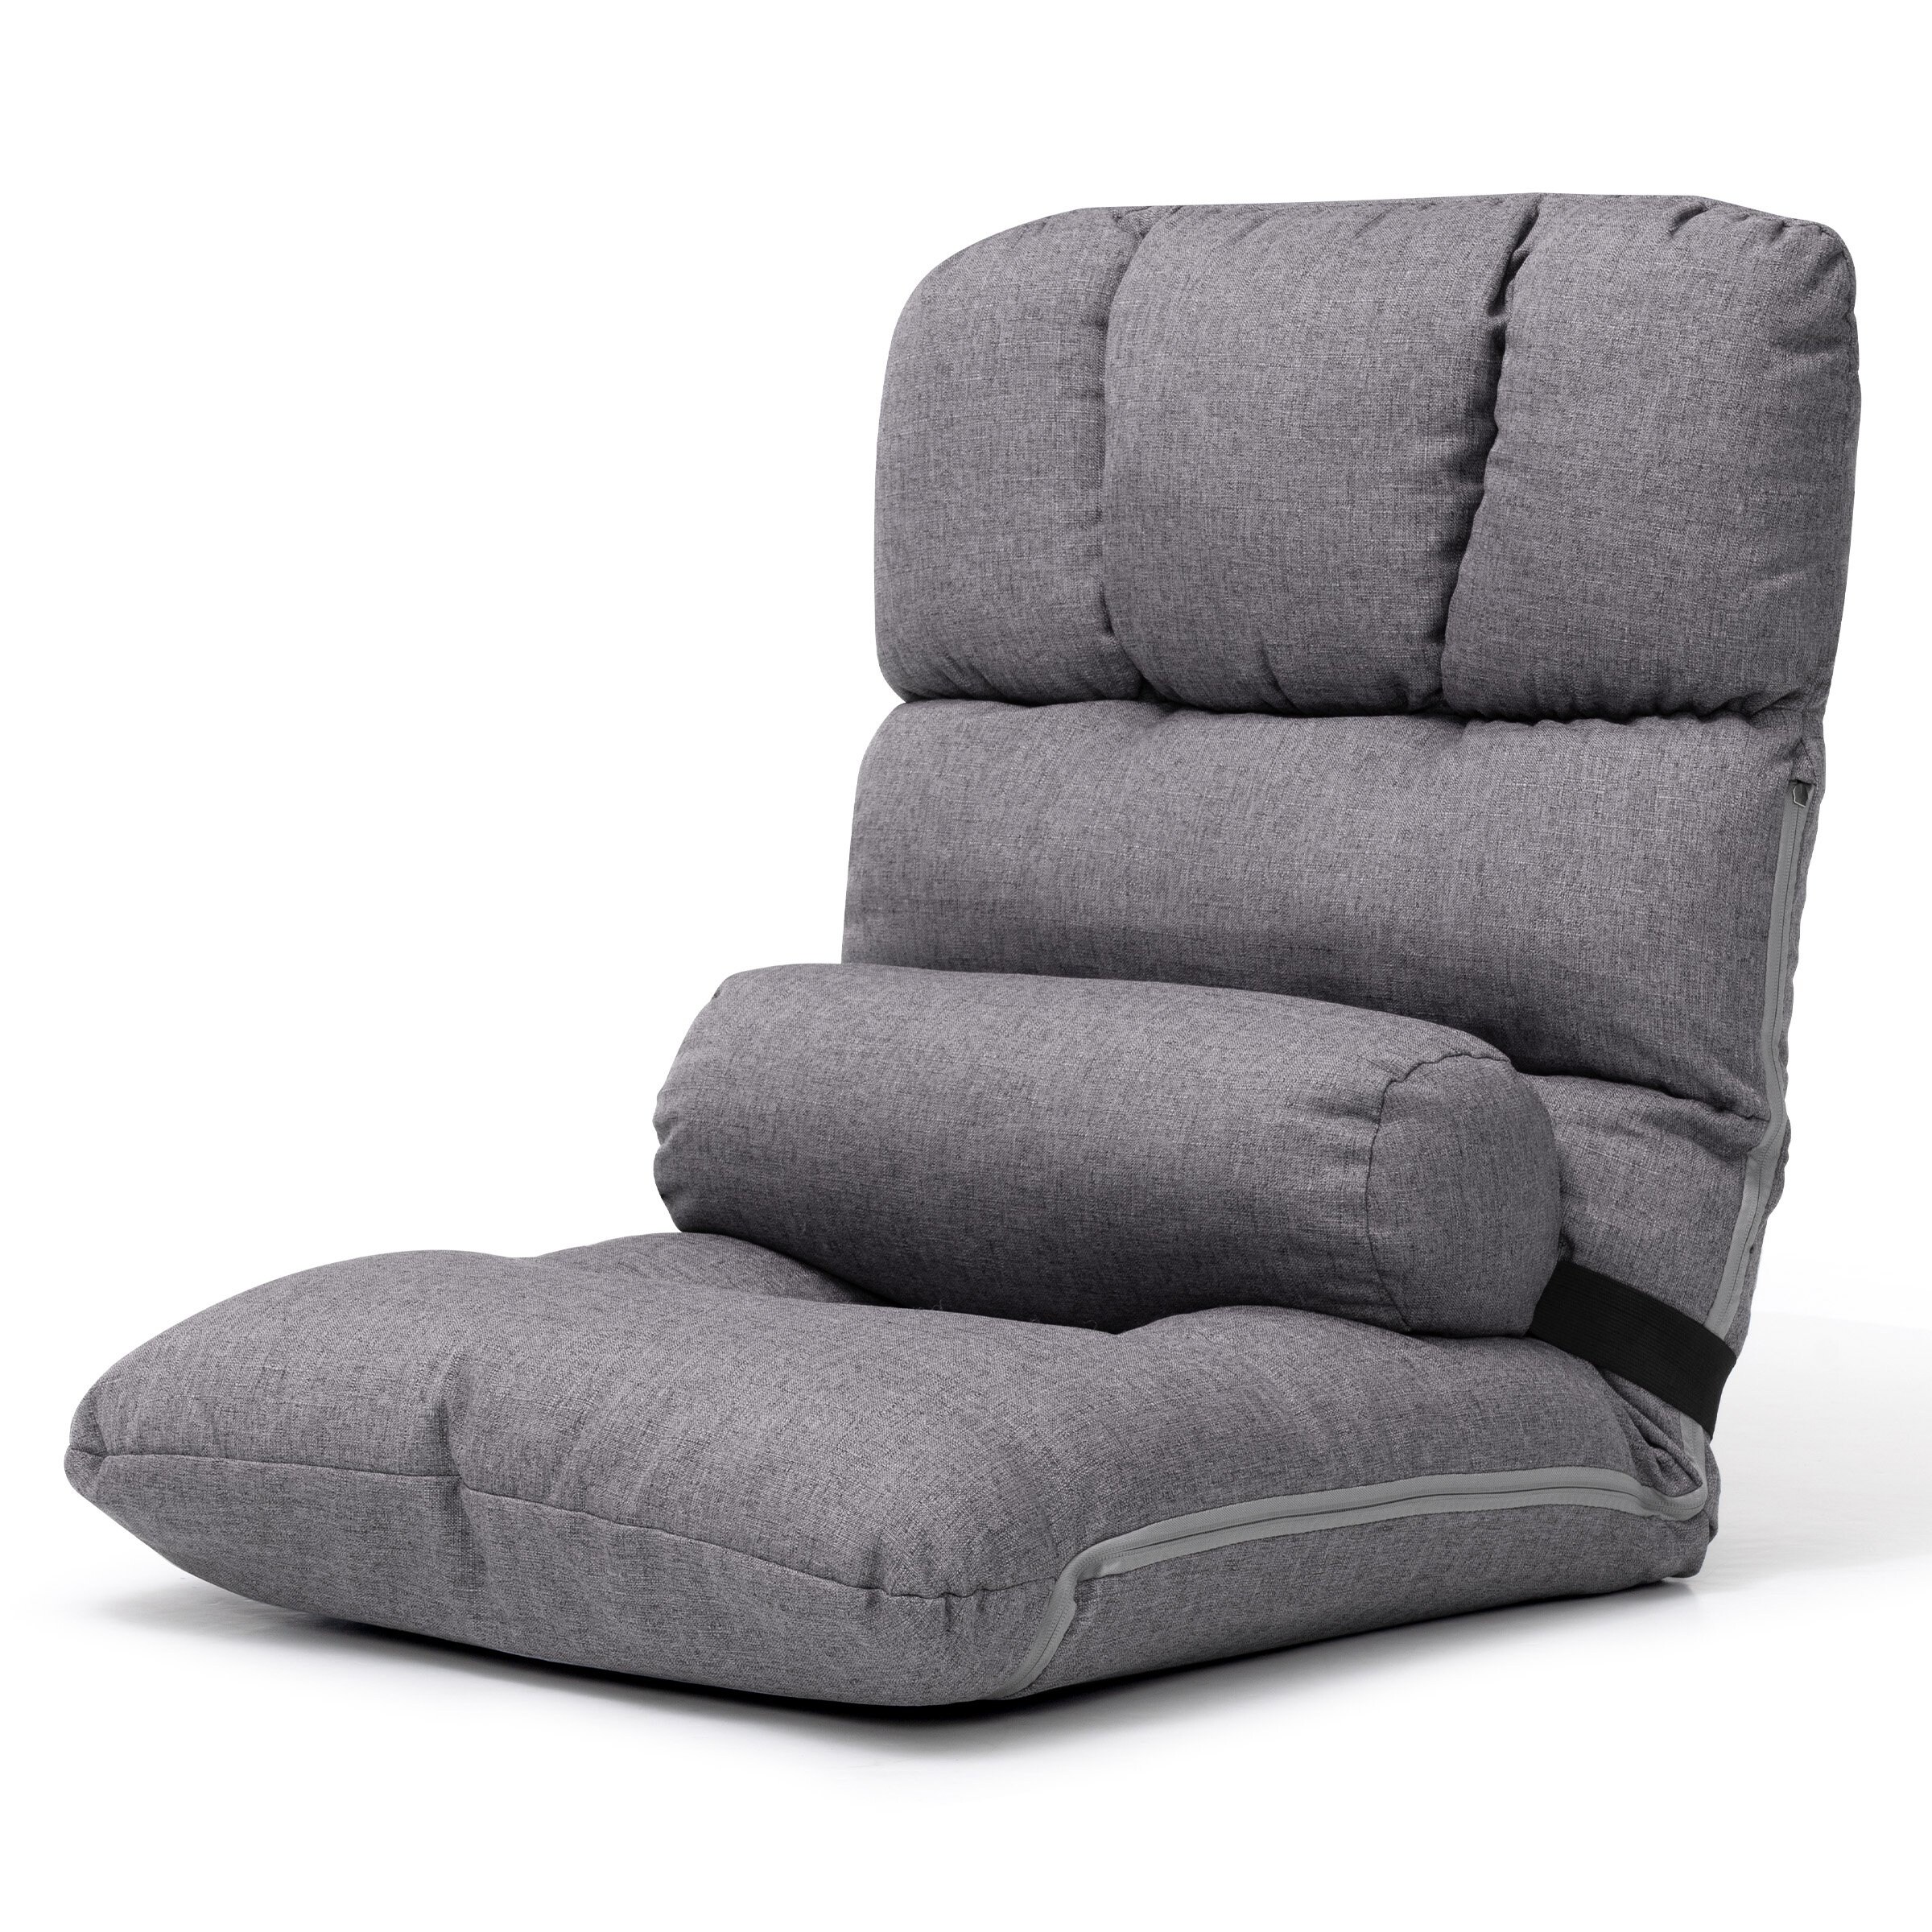 Adjustable Floor Chair Folding Recliner Padded Lazy Gaming Sofa - On Sale -  Bed Bath & Beyond - 32313047